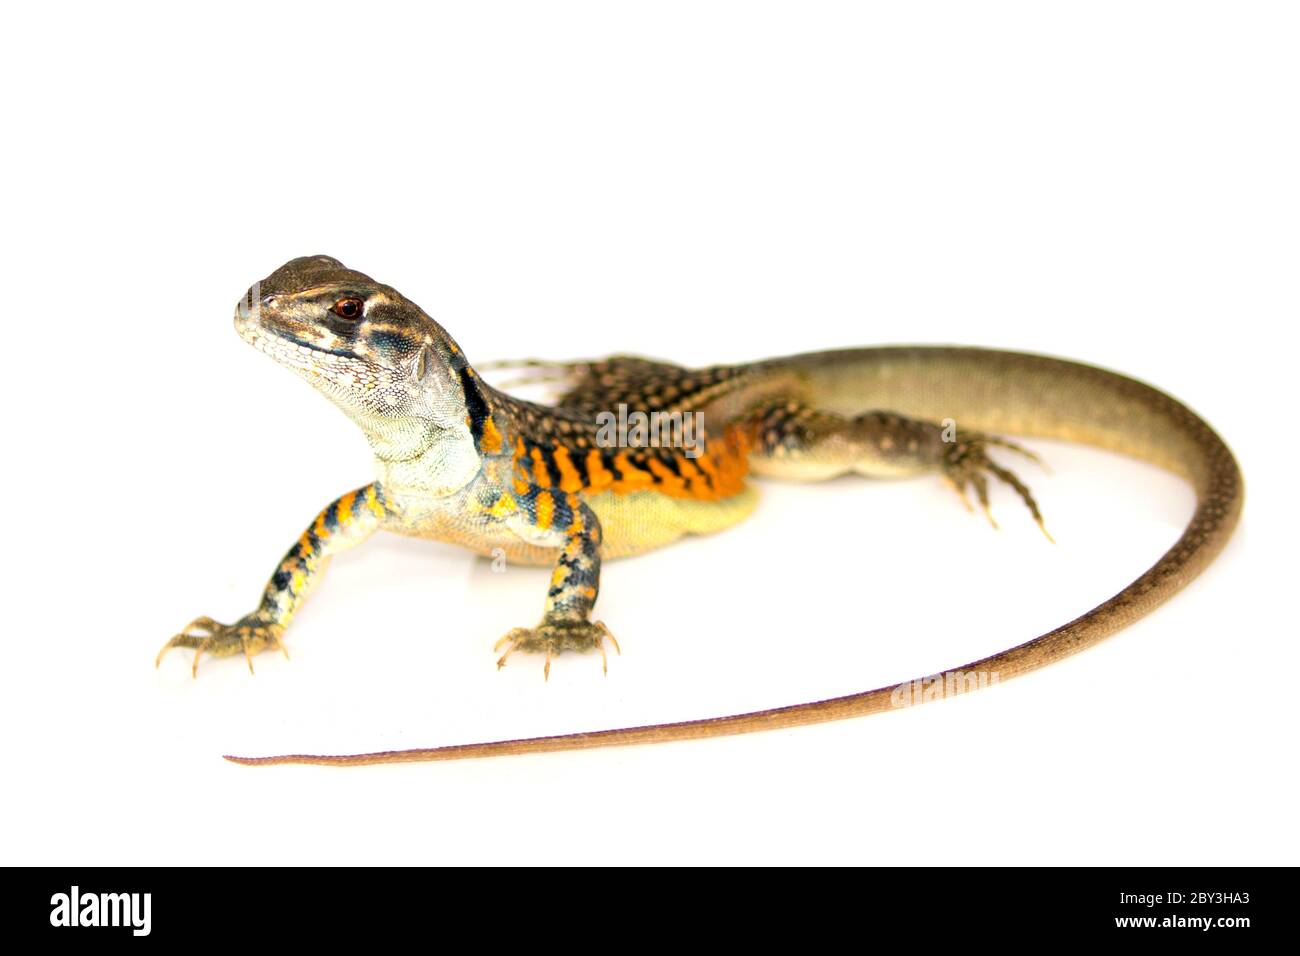 Image of Butterfly Agama Lizard (Leiolepis Cuvier) on white background. Reptile Animal Stock Photo